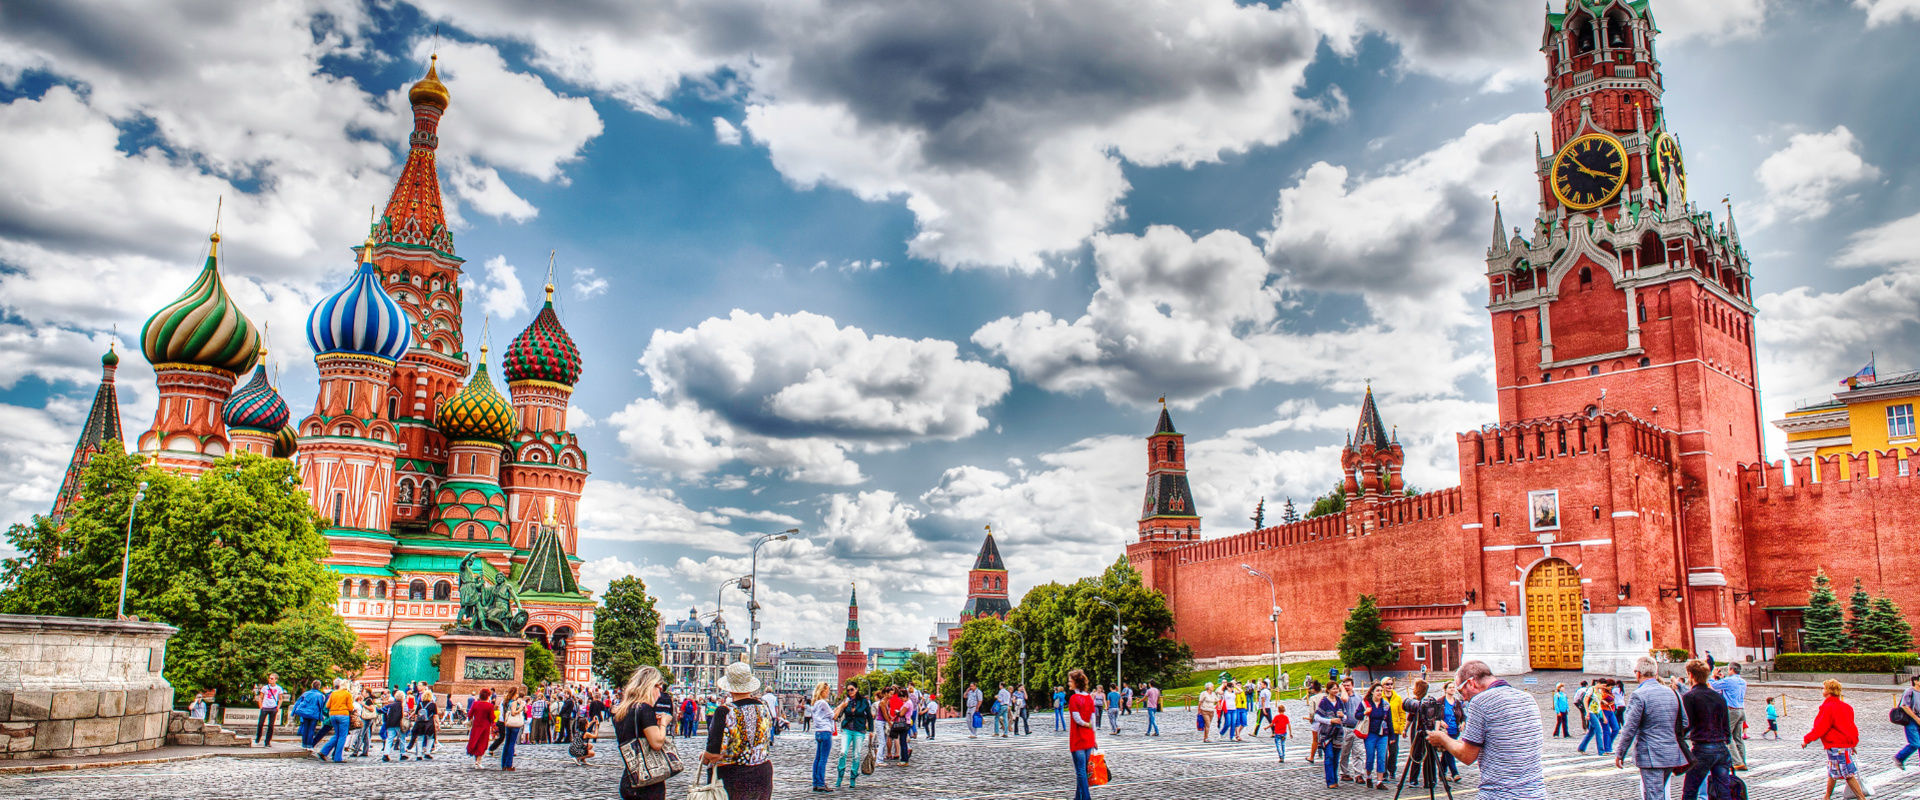 How To Apply For Russia Student Visa From Nigeria